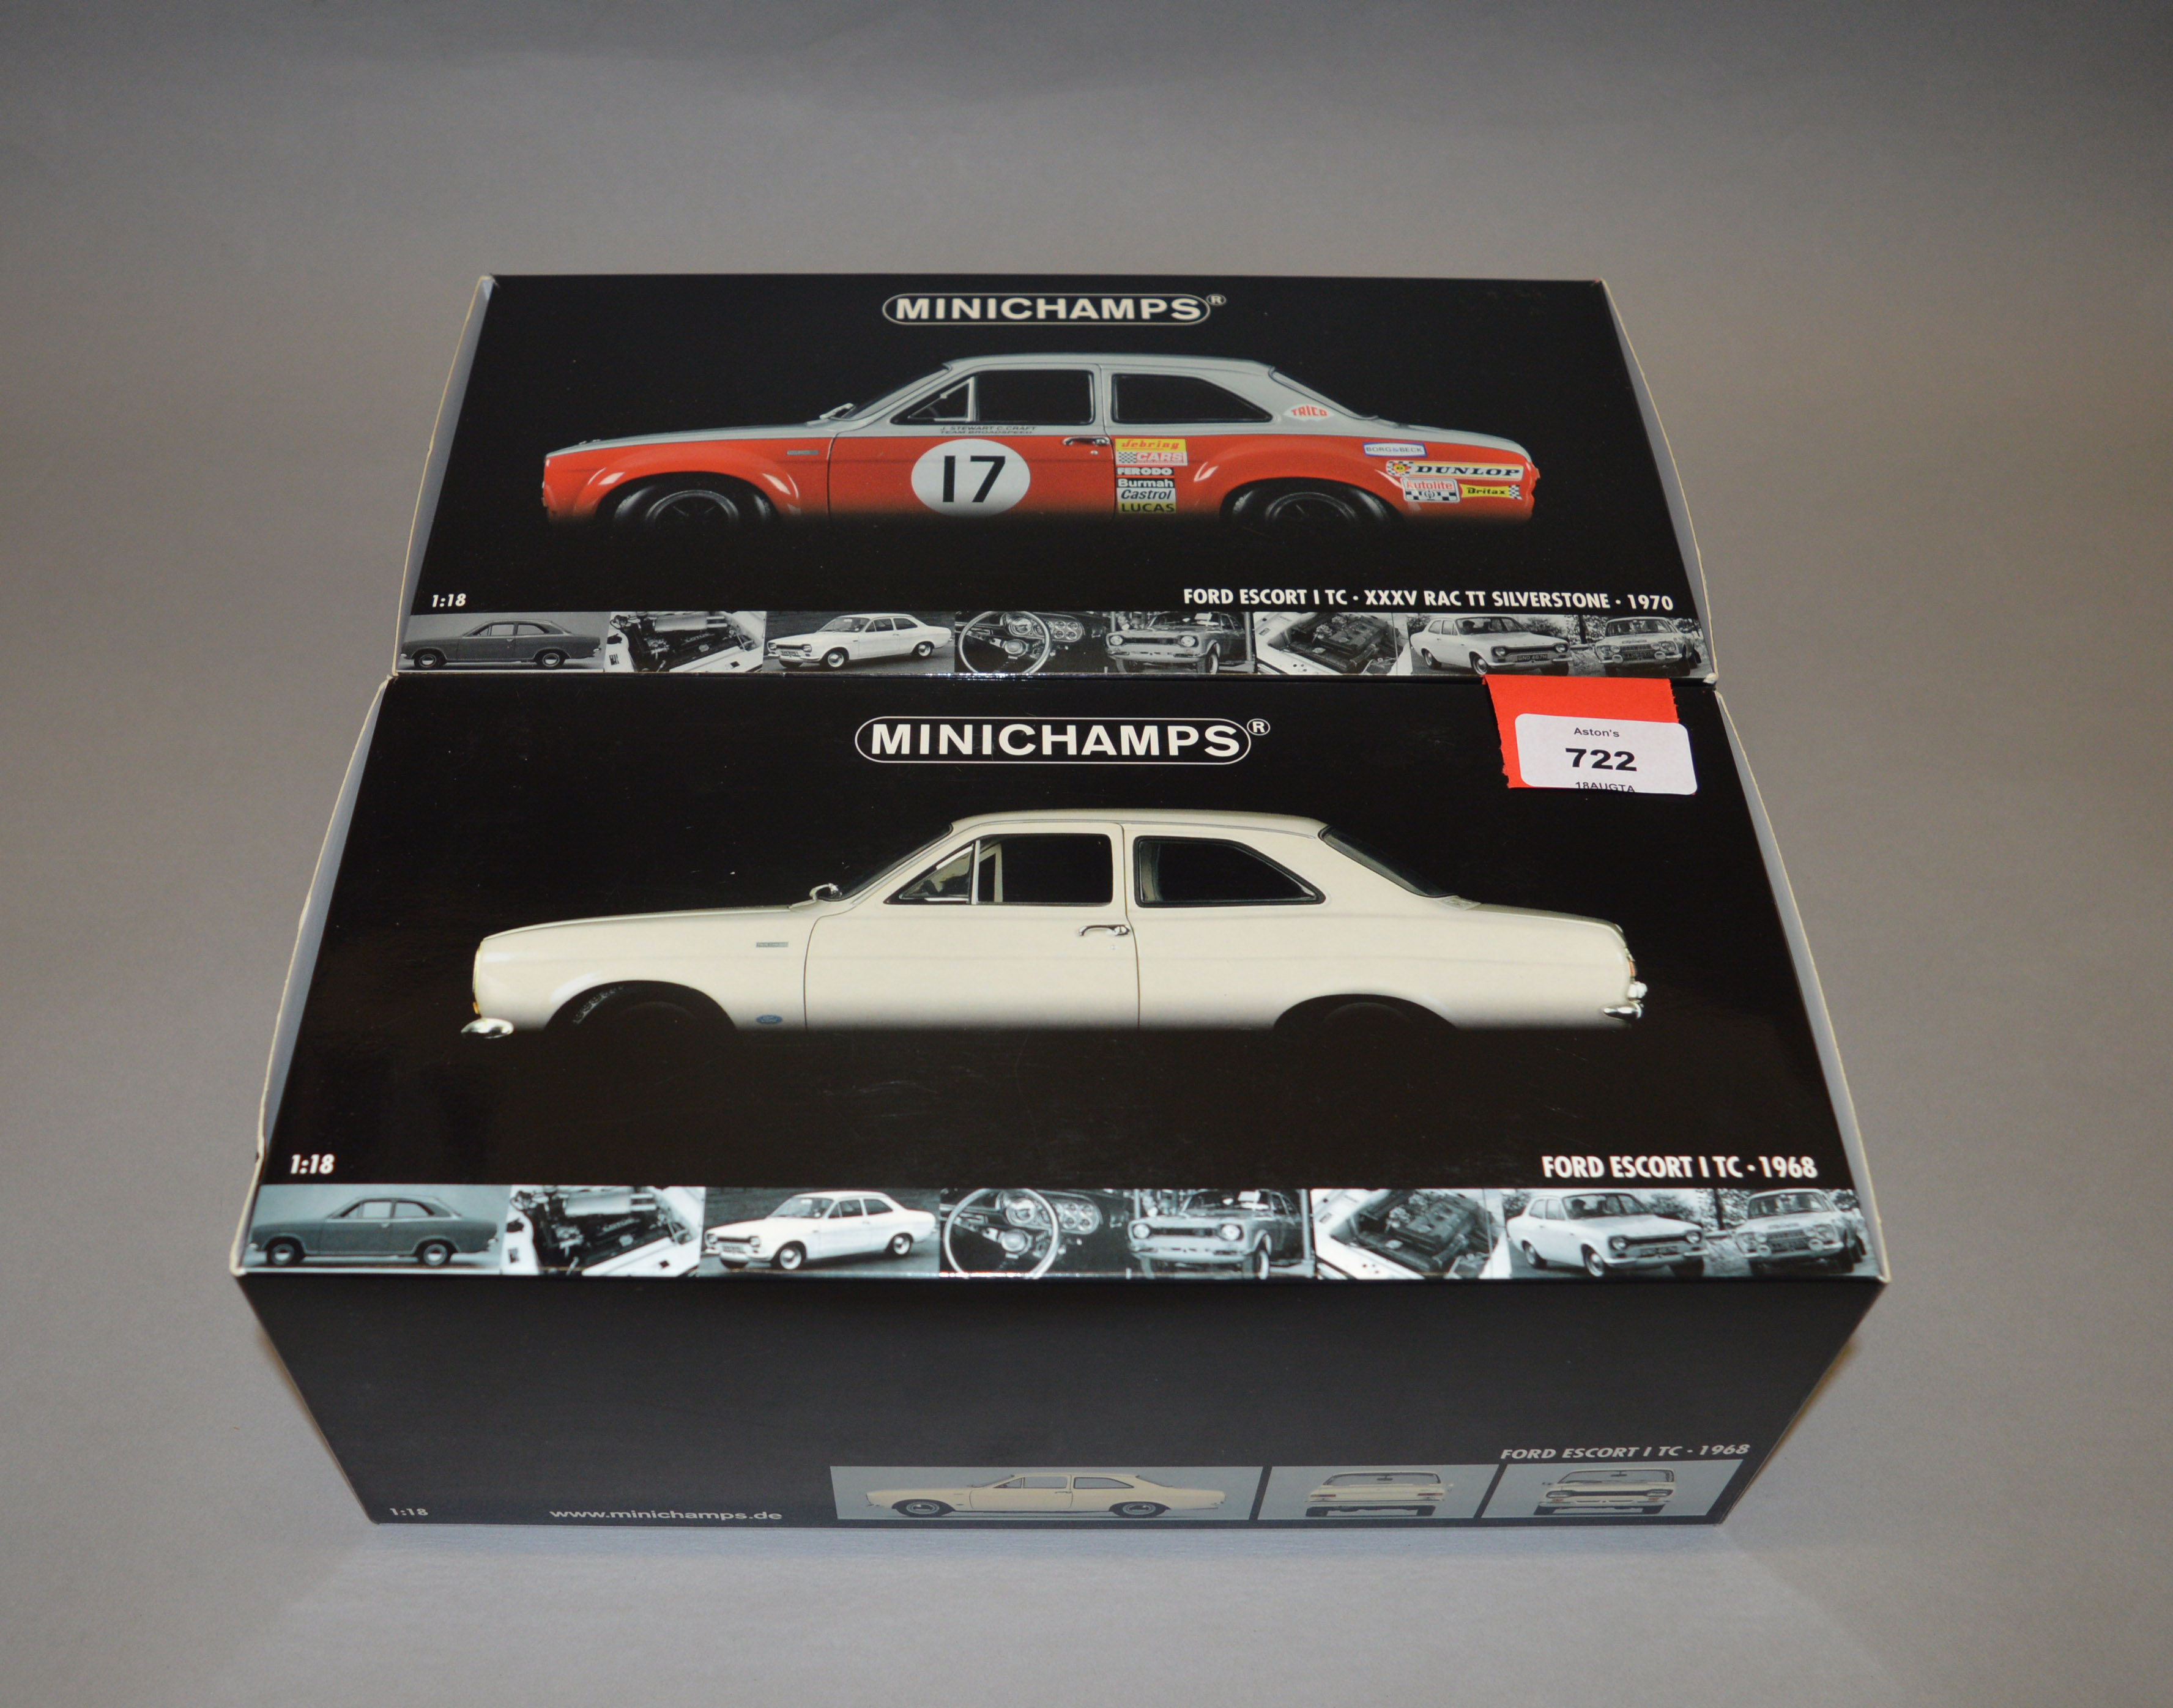 Two boxed Minichamps Ford Escort I TC diecast model cars in 1:18 scale,